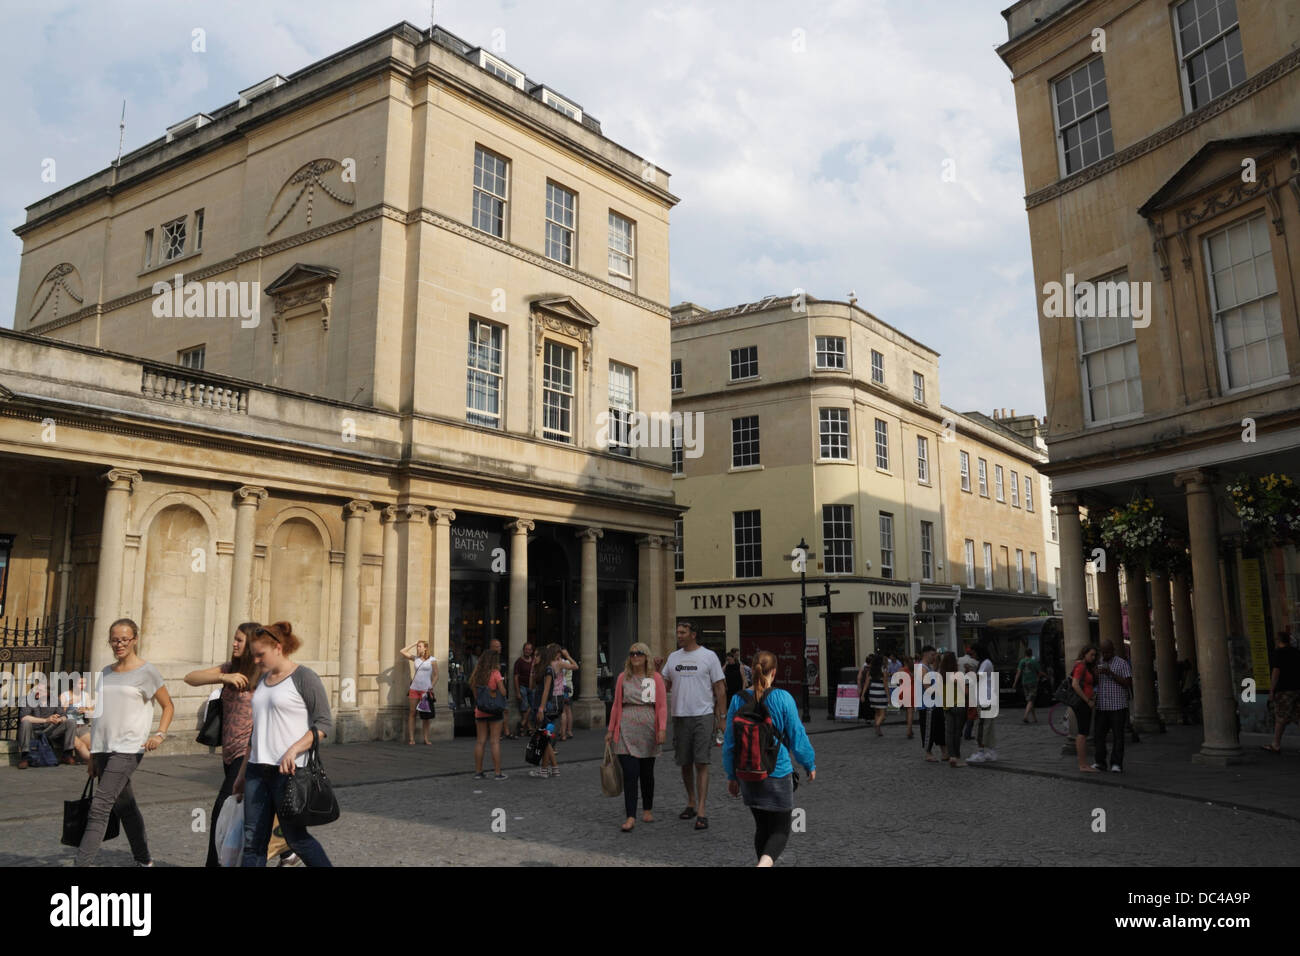 People walking through Stall Street in the centre of Bath England, English towncentre streetscene Stock Photo